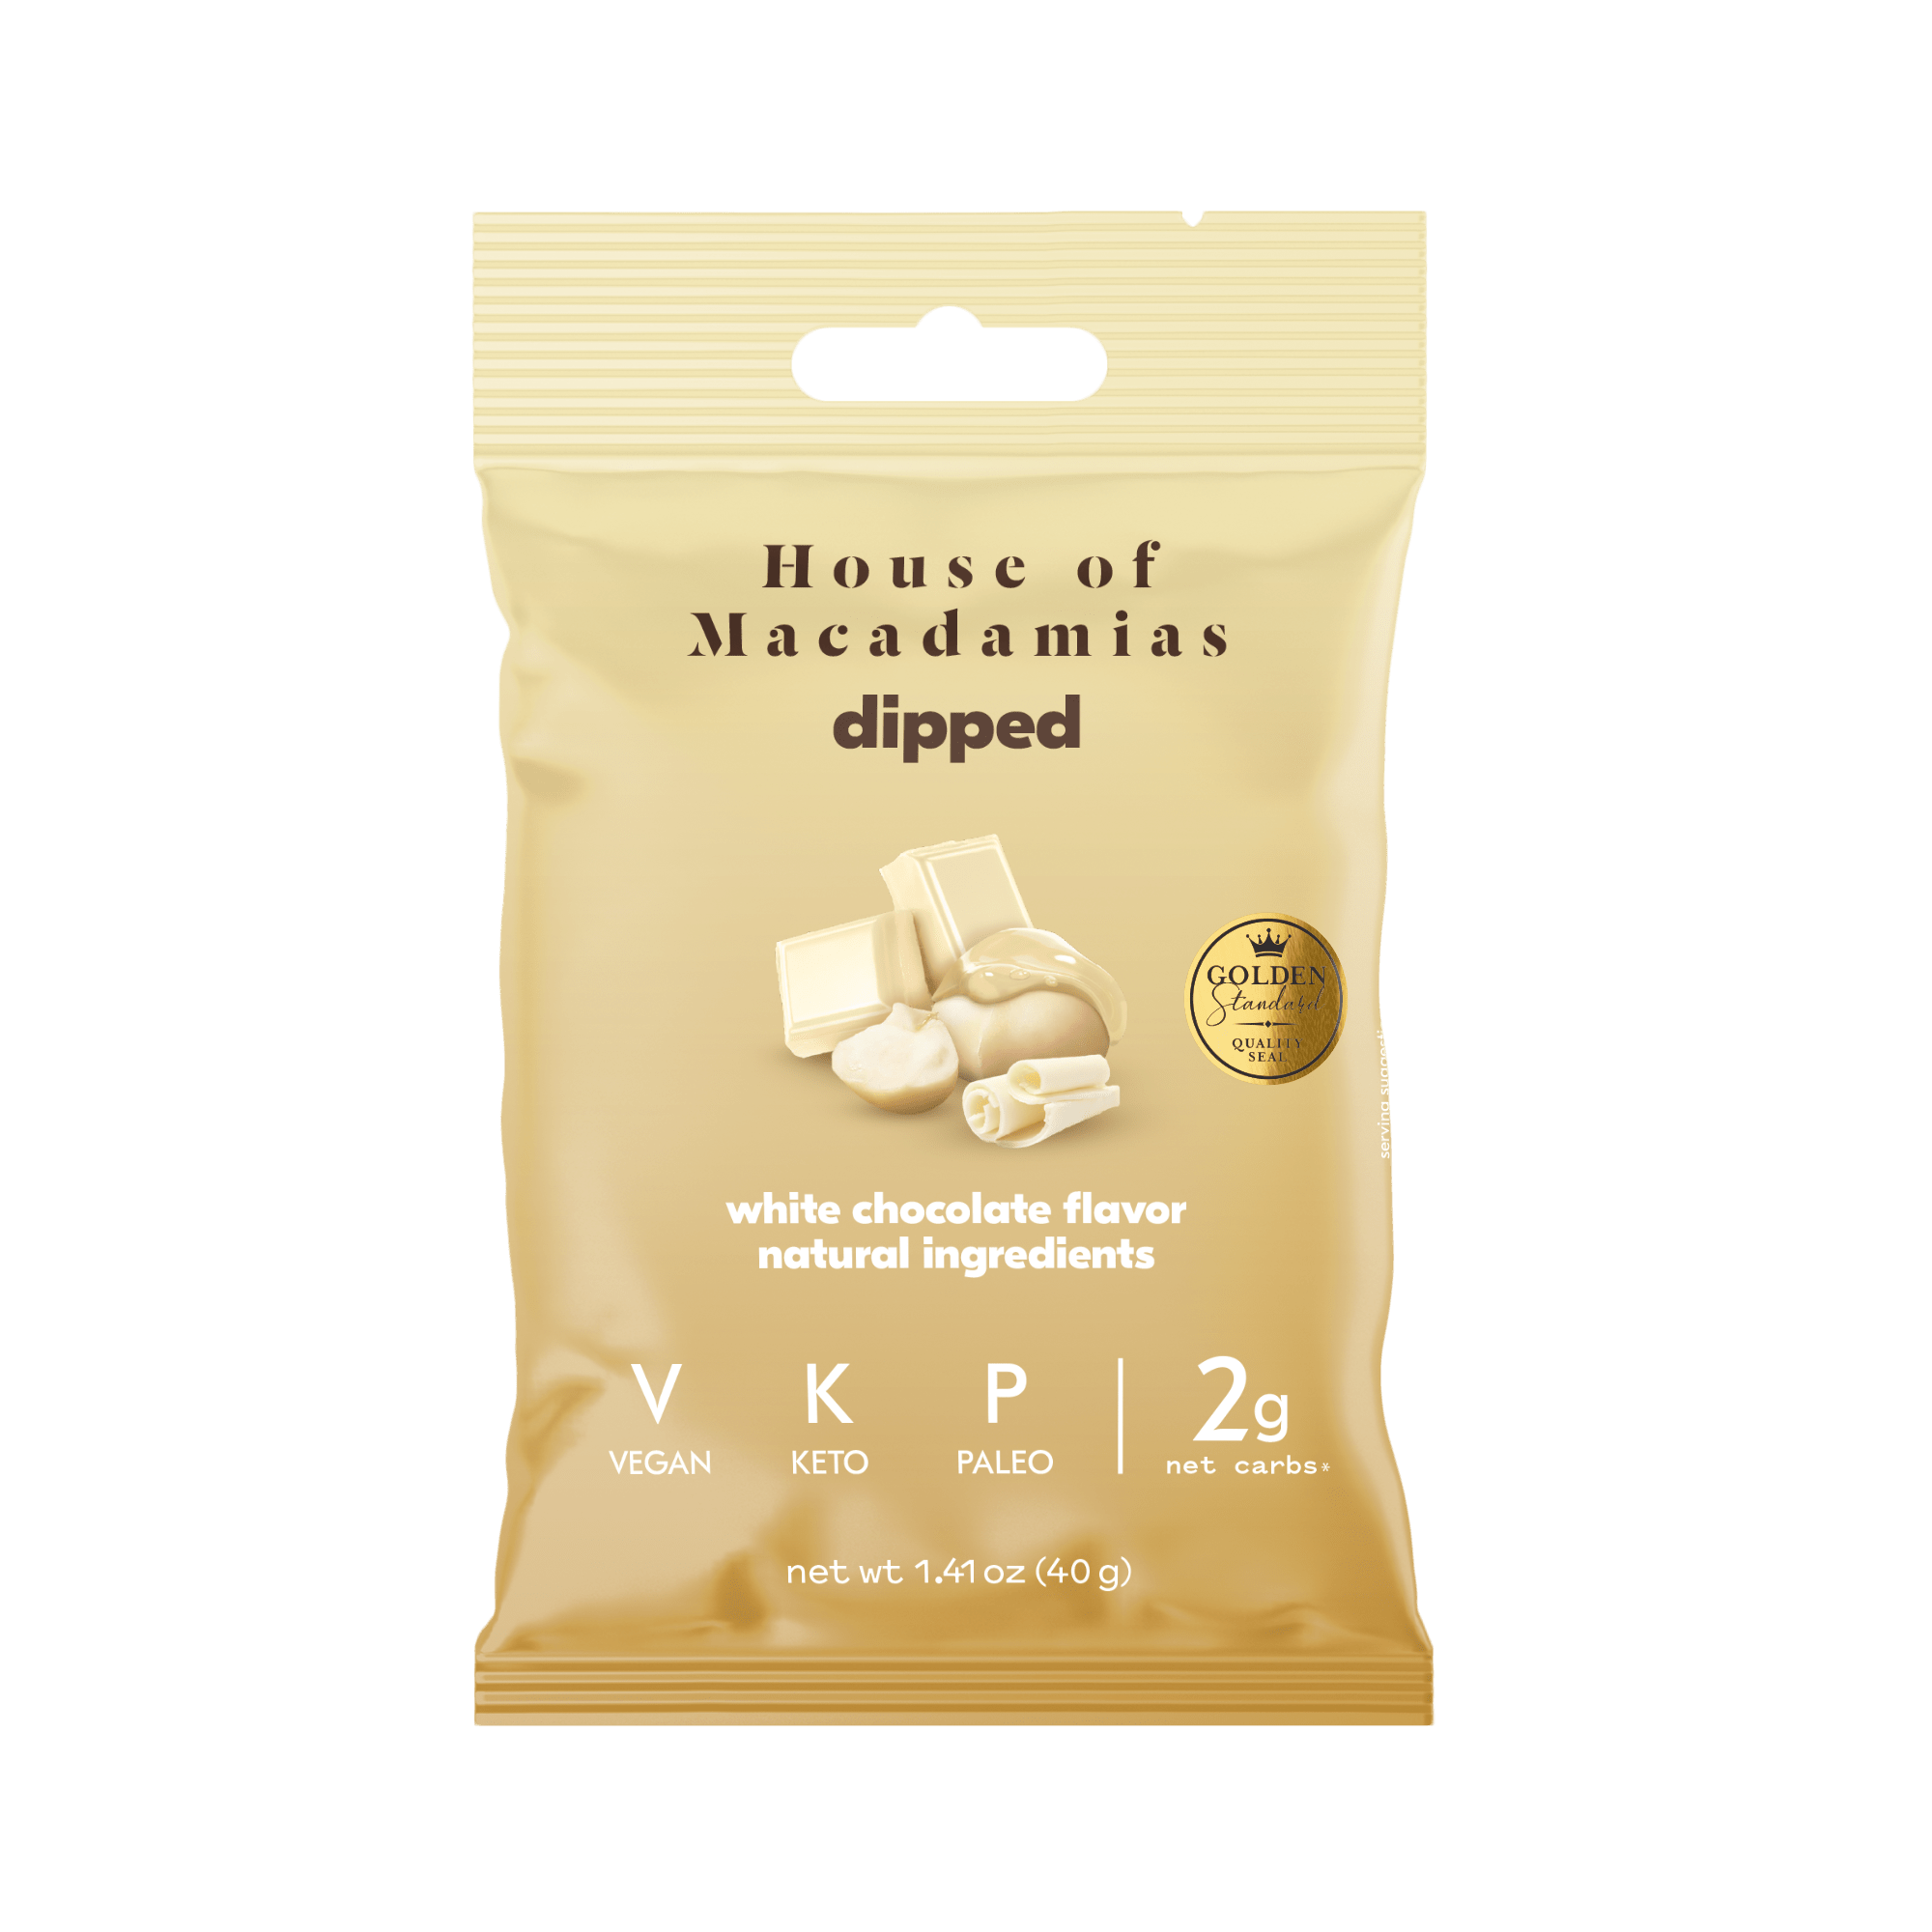 Macadamia Dipped Nuts Variety Pack (3 Flavors, 12 Bags) - House of Macadamias - heart healthy nuts